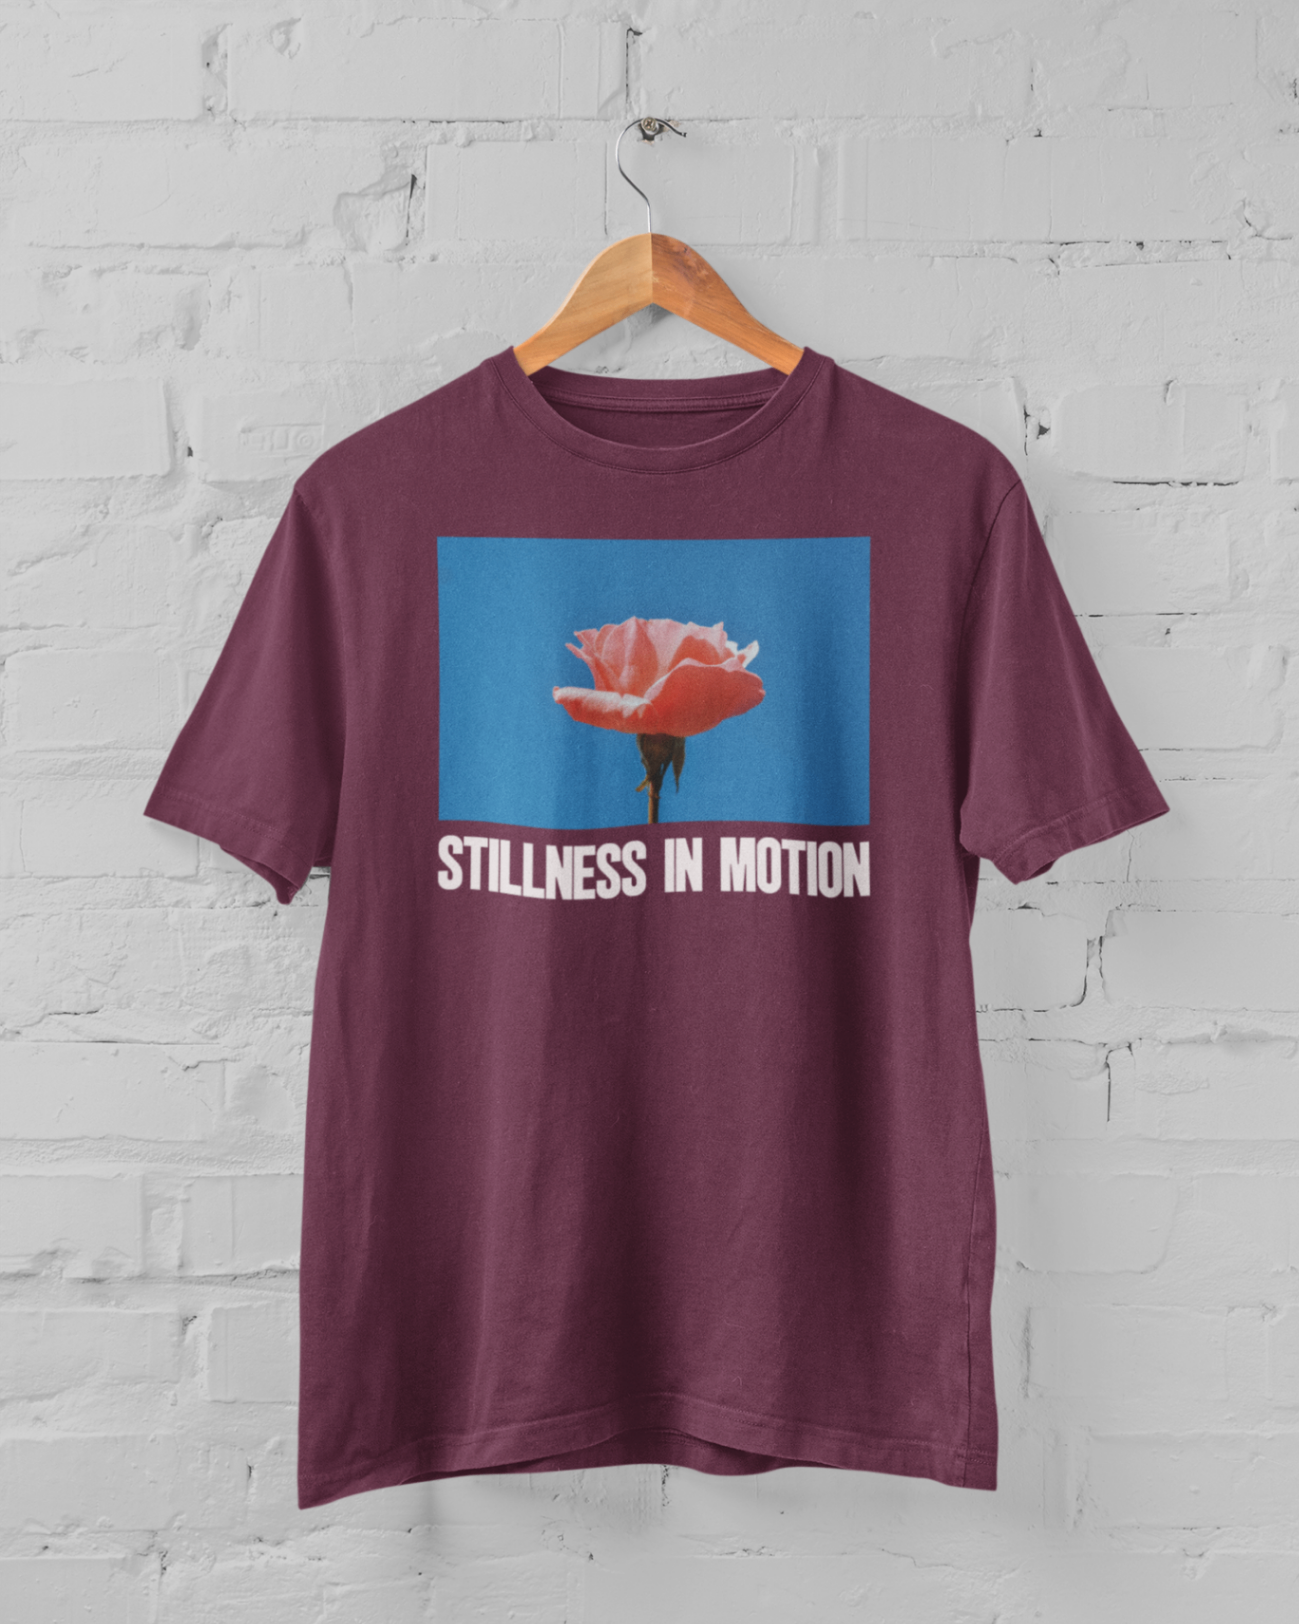 a maroon tshirt with stillness in motion written in text under a pink flower over a sky blue backround